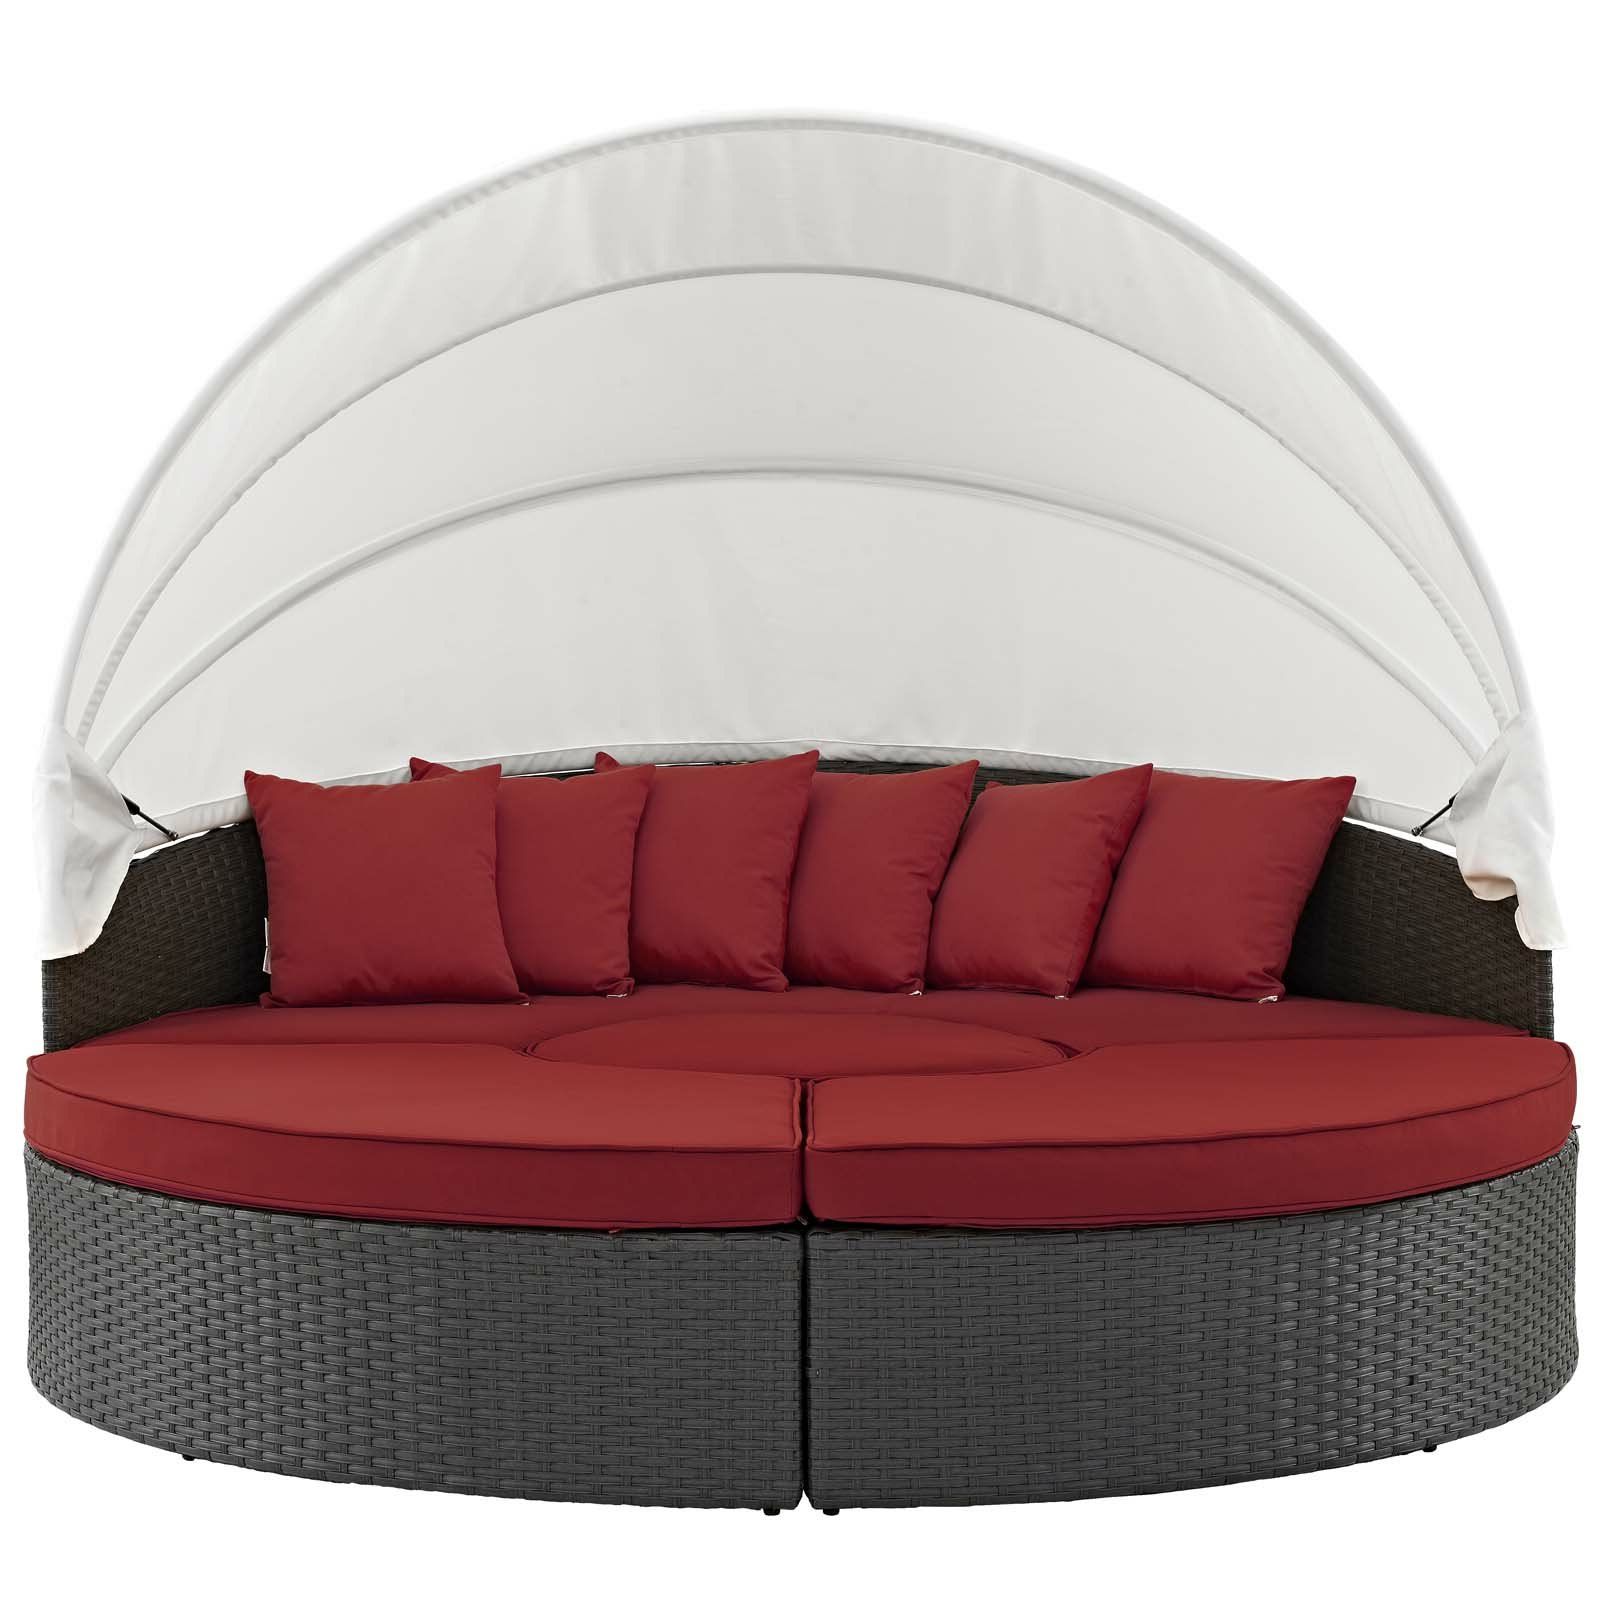 Tripp Patio Daybeds With Cushions Pertaining To Current Tripp Patio Daybed With Sunbrella Cushions (Photo 4 of 20)